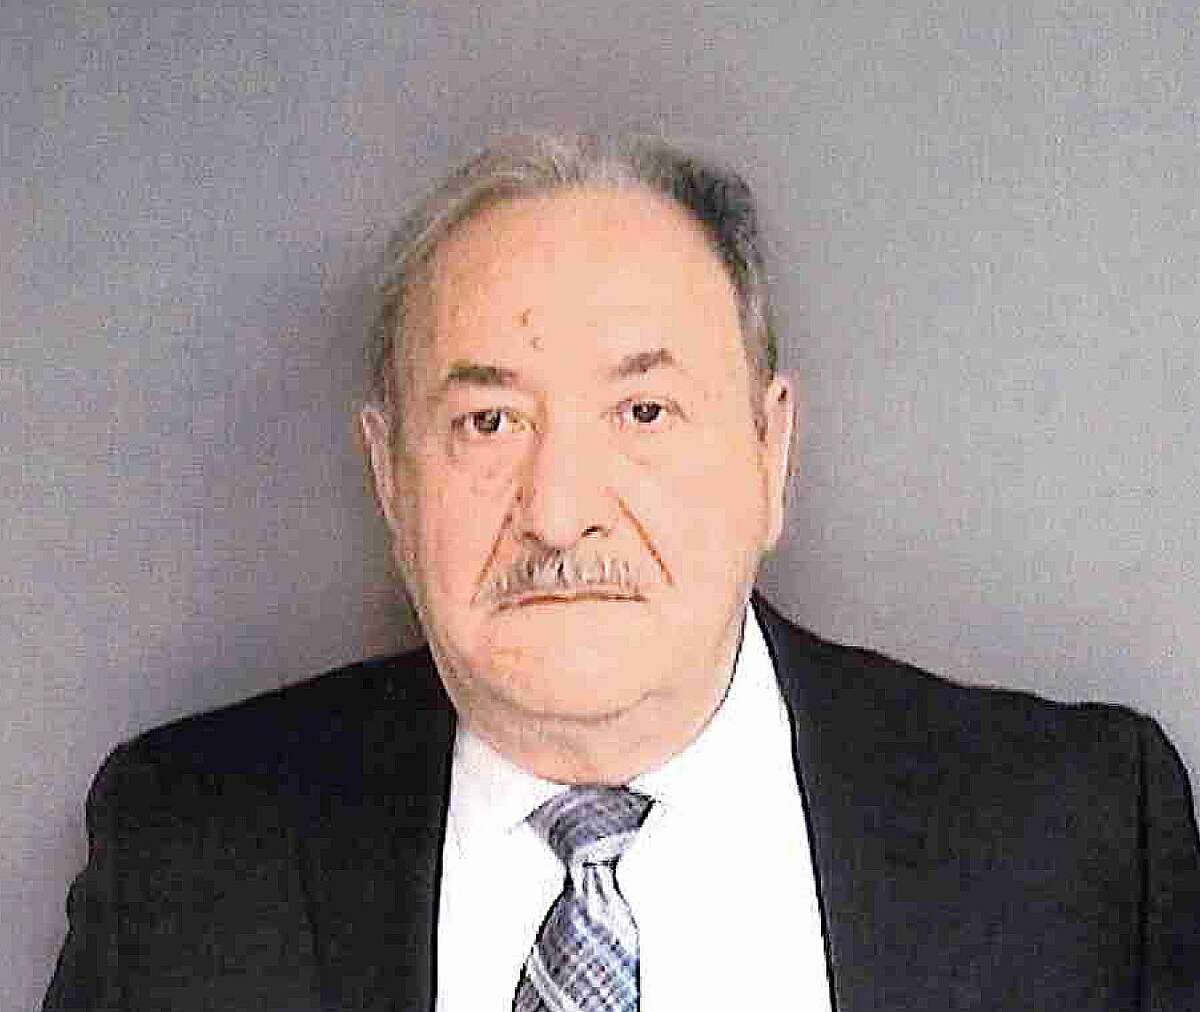 John Mallozzi charged with 14 counts each of filing false statements and second-degree forgery in an identity-theft scheme involving absentee ballots stemming from the 2015 municipal election.